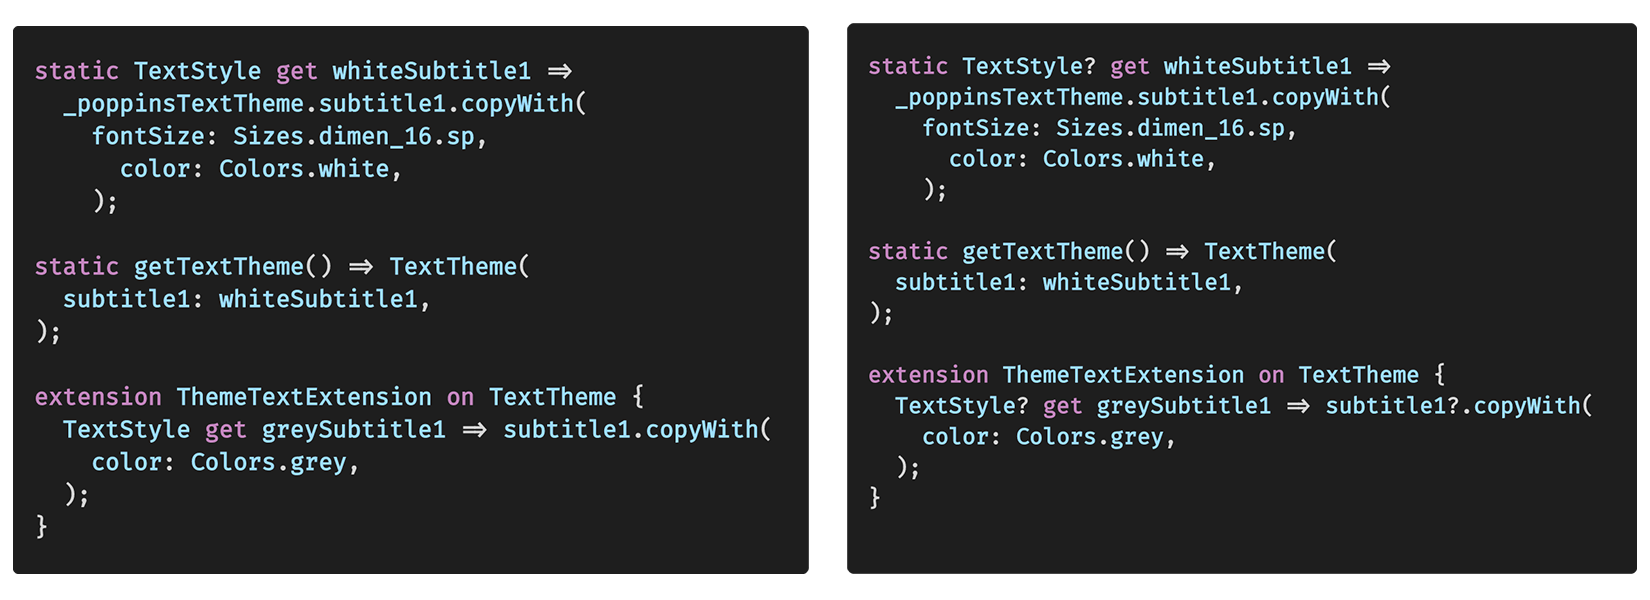 unchecked_use_of_nullable_value_textstyle_comparison.png